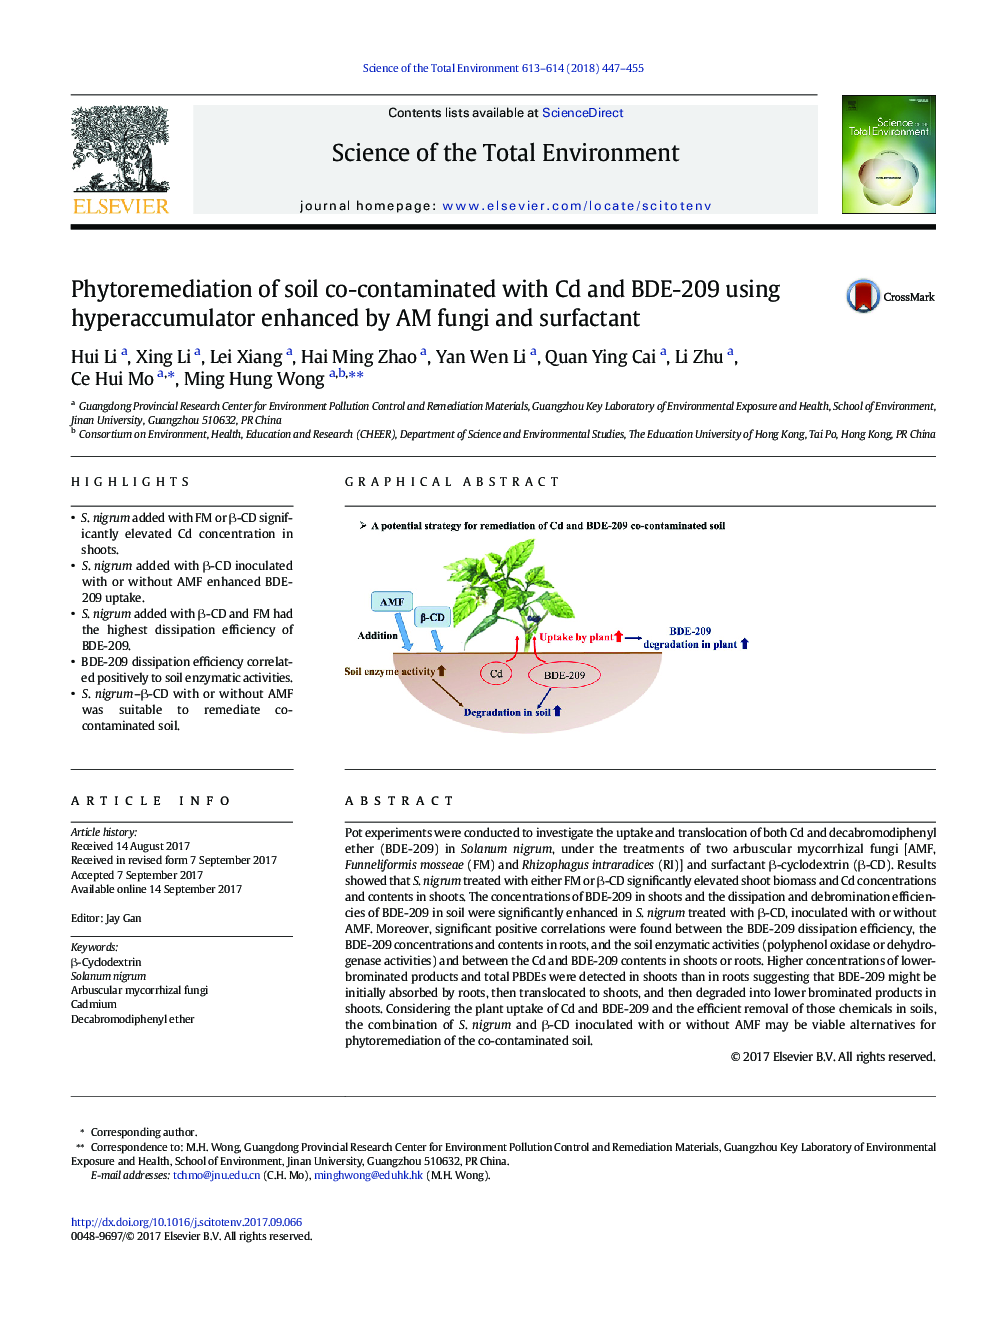 Phytoremediation of soil co-contaminated with Cd and BDE-209 using hyperaccumulator enhanced by AM fungi and surfactant